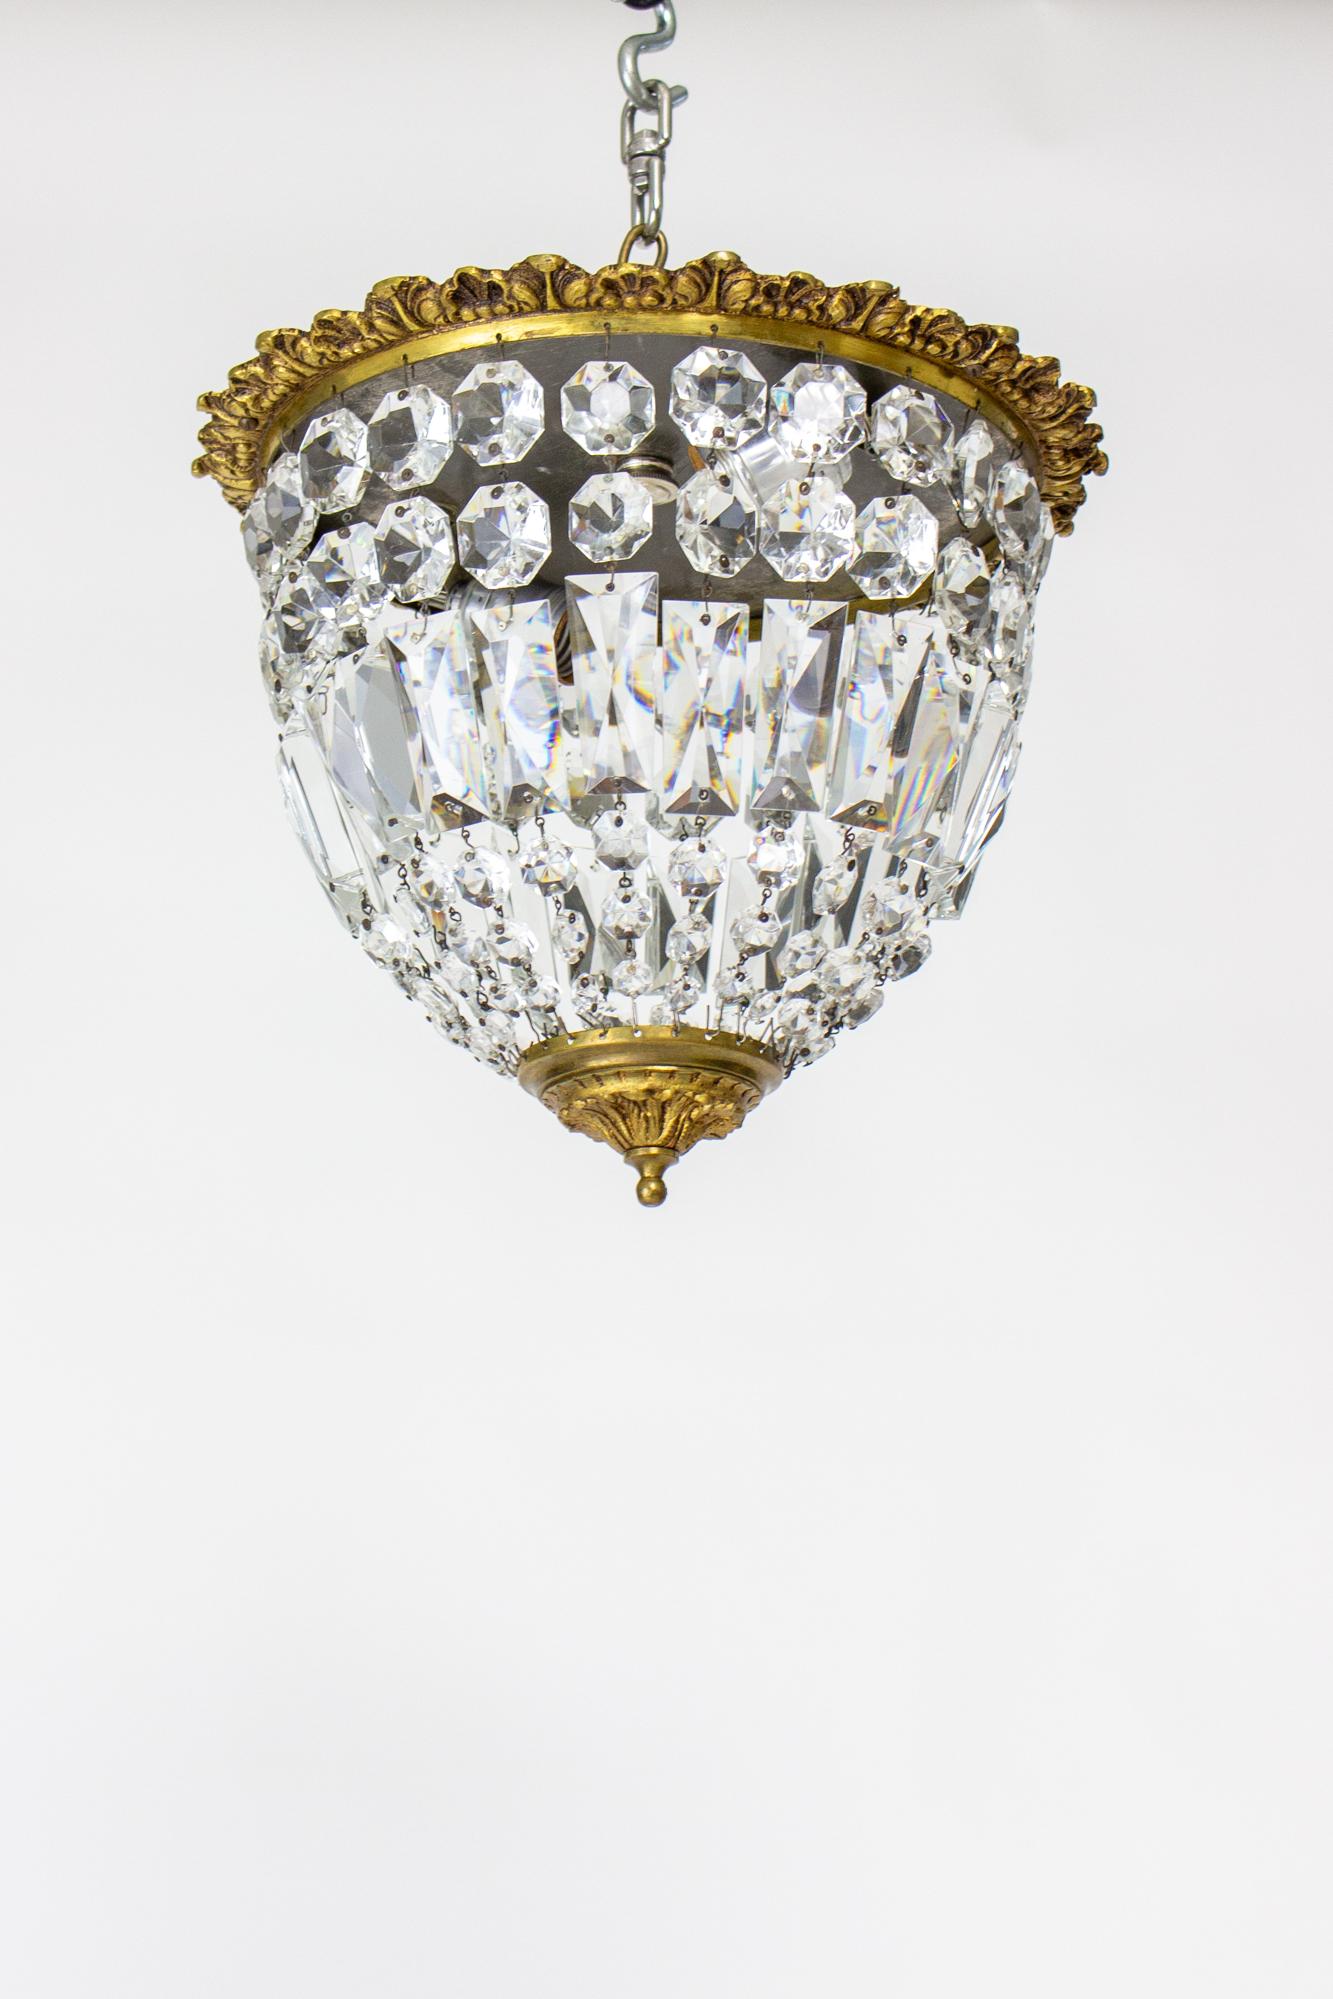 Mid 20th Century brass and crystal basket flush mount fixture. Ornate cast brass frame sits flush to the ceiling with crystal strands draping to a center bottom brass dish. Suitable for low ceilings and a small entry, hallway, or powder room. Two